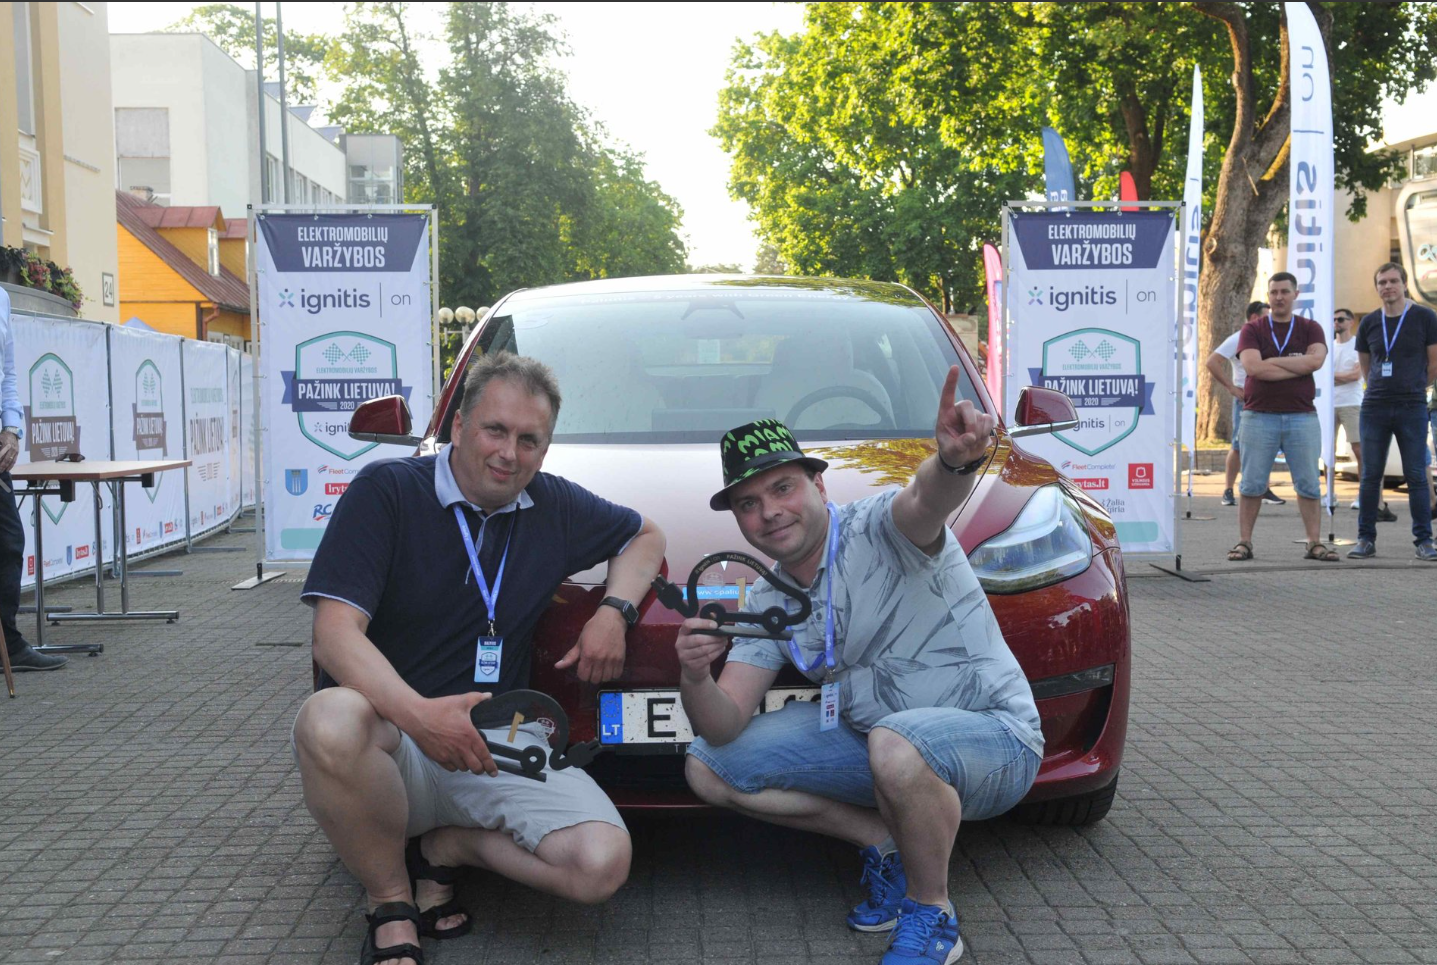 Tesla Model 3 and Peugeot e-208 crews triumphed in electric car competition